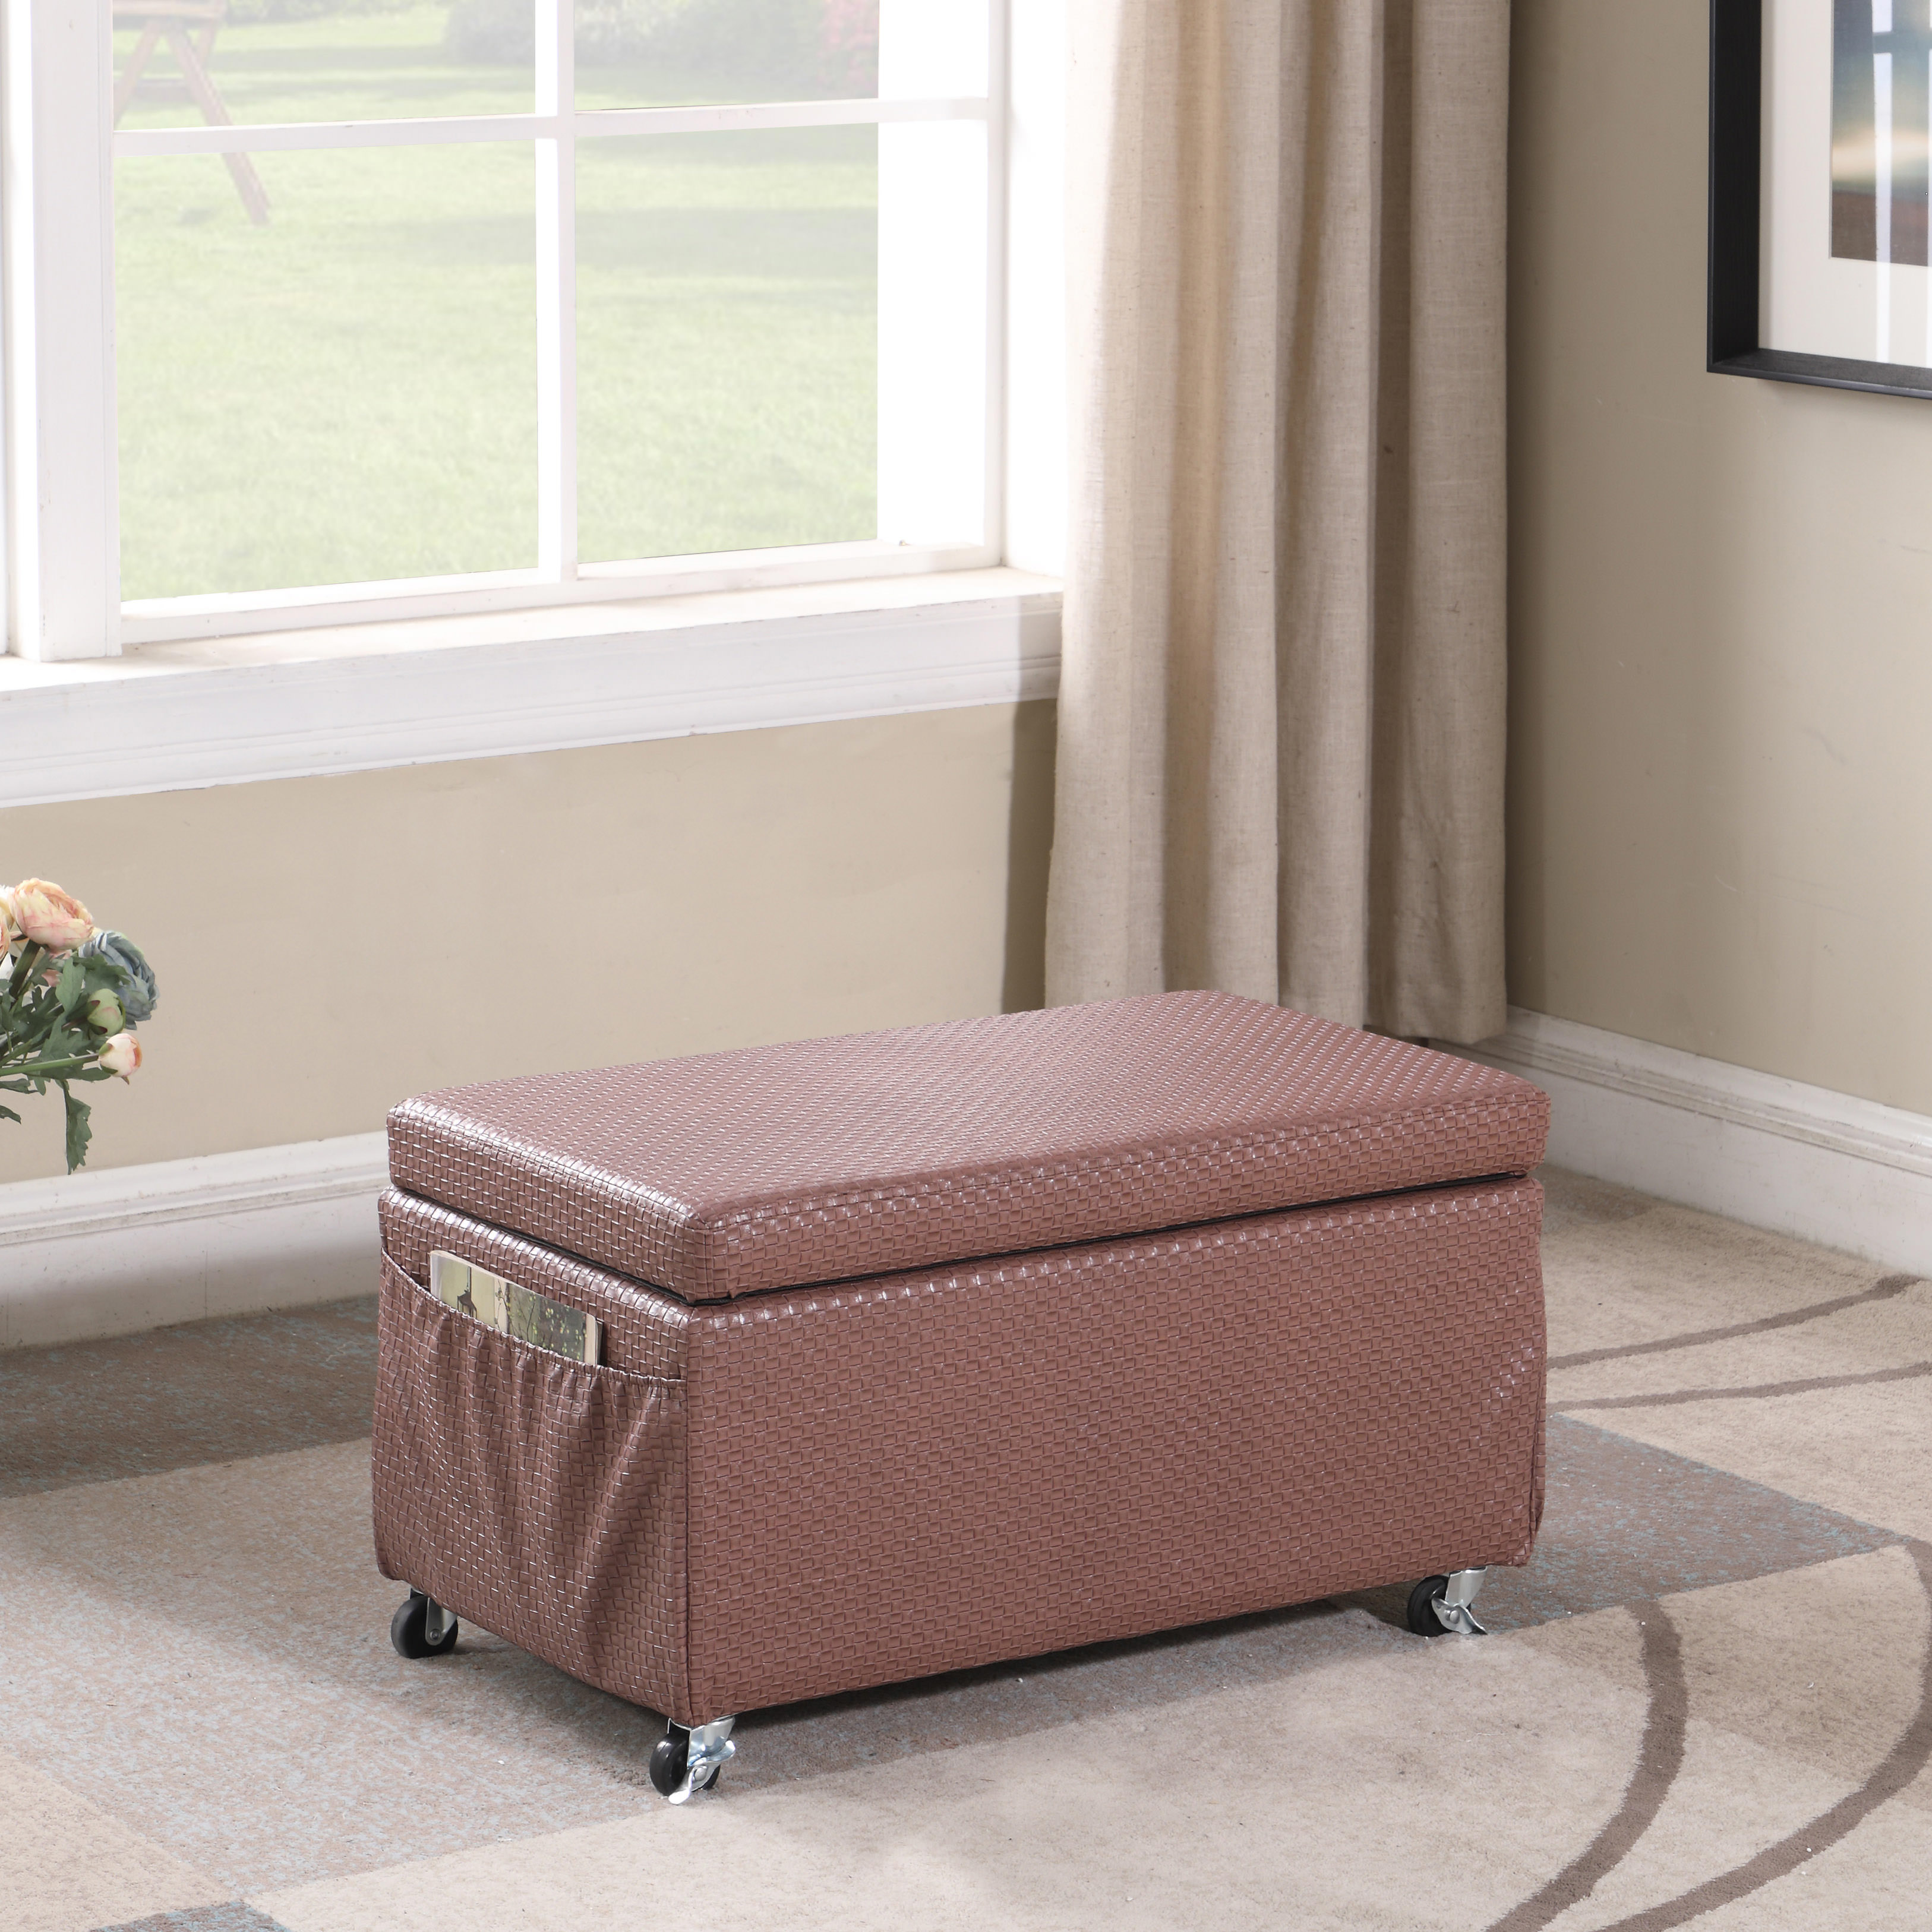 Ore International 17" in Auburn Brown Basketweave Leatherette Storage Bench seat w/Side Pockets and Industrial Caster Wheels